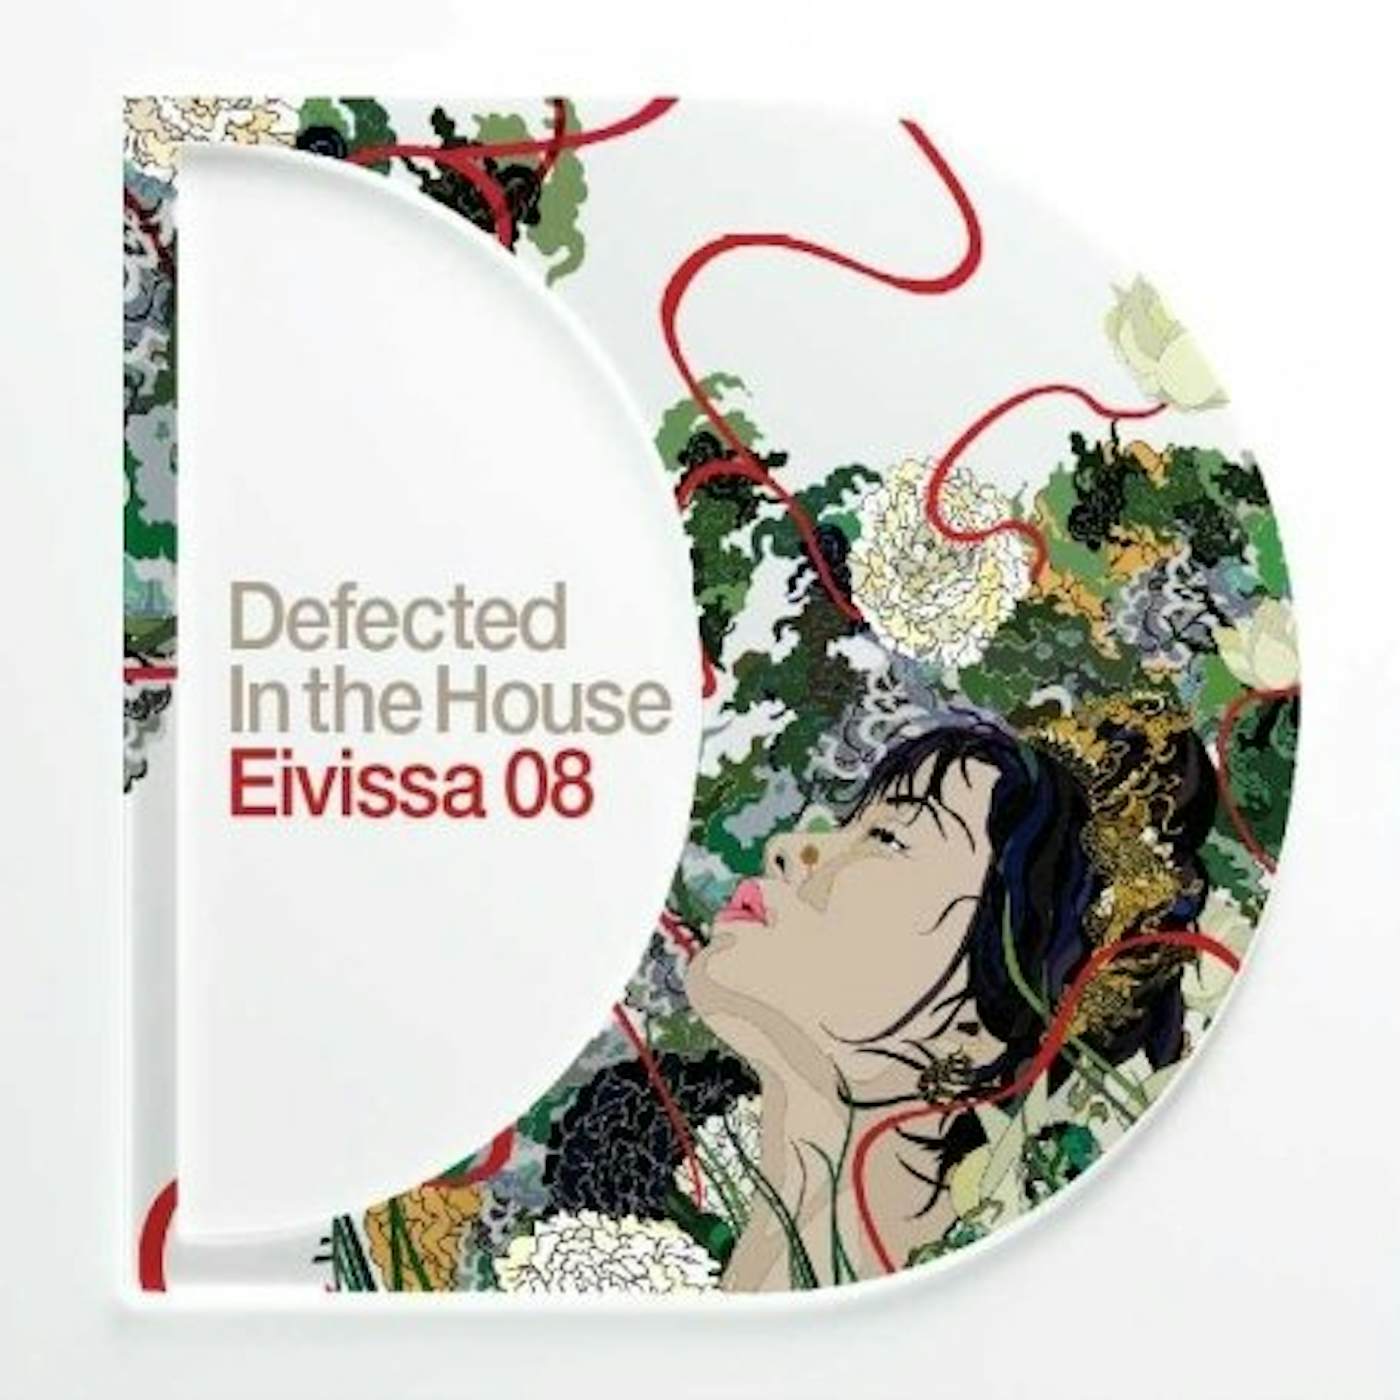 DEFECTED IN THE HOUSE: EIVISSA 08 EP 1 / VARIOUS Vinyl Record